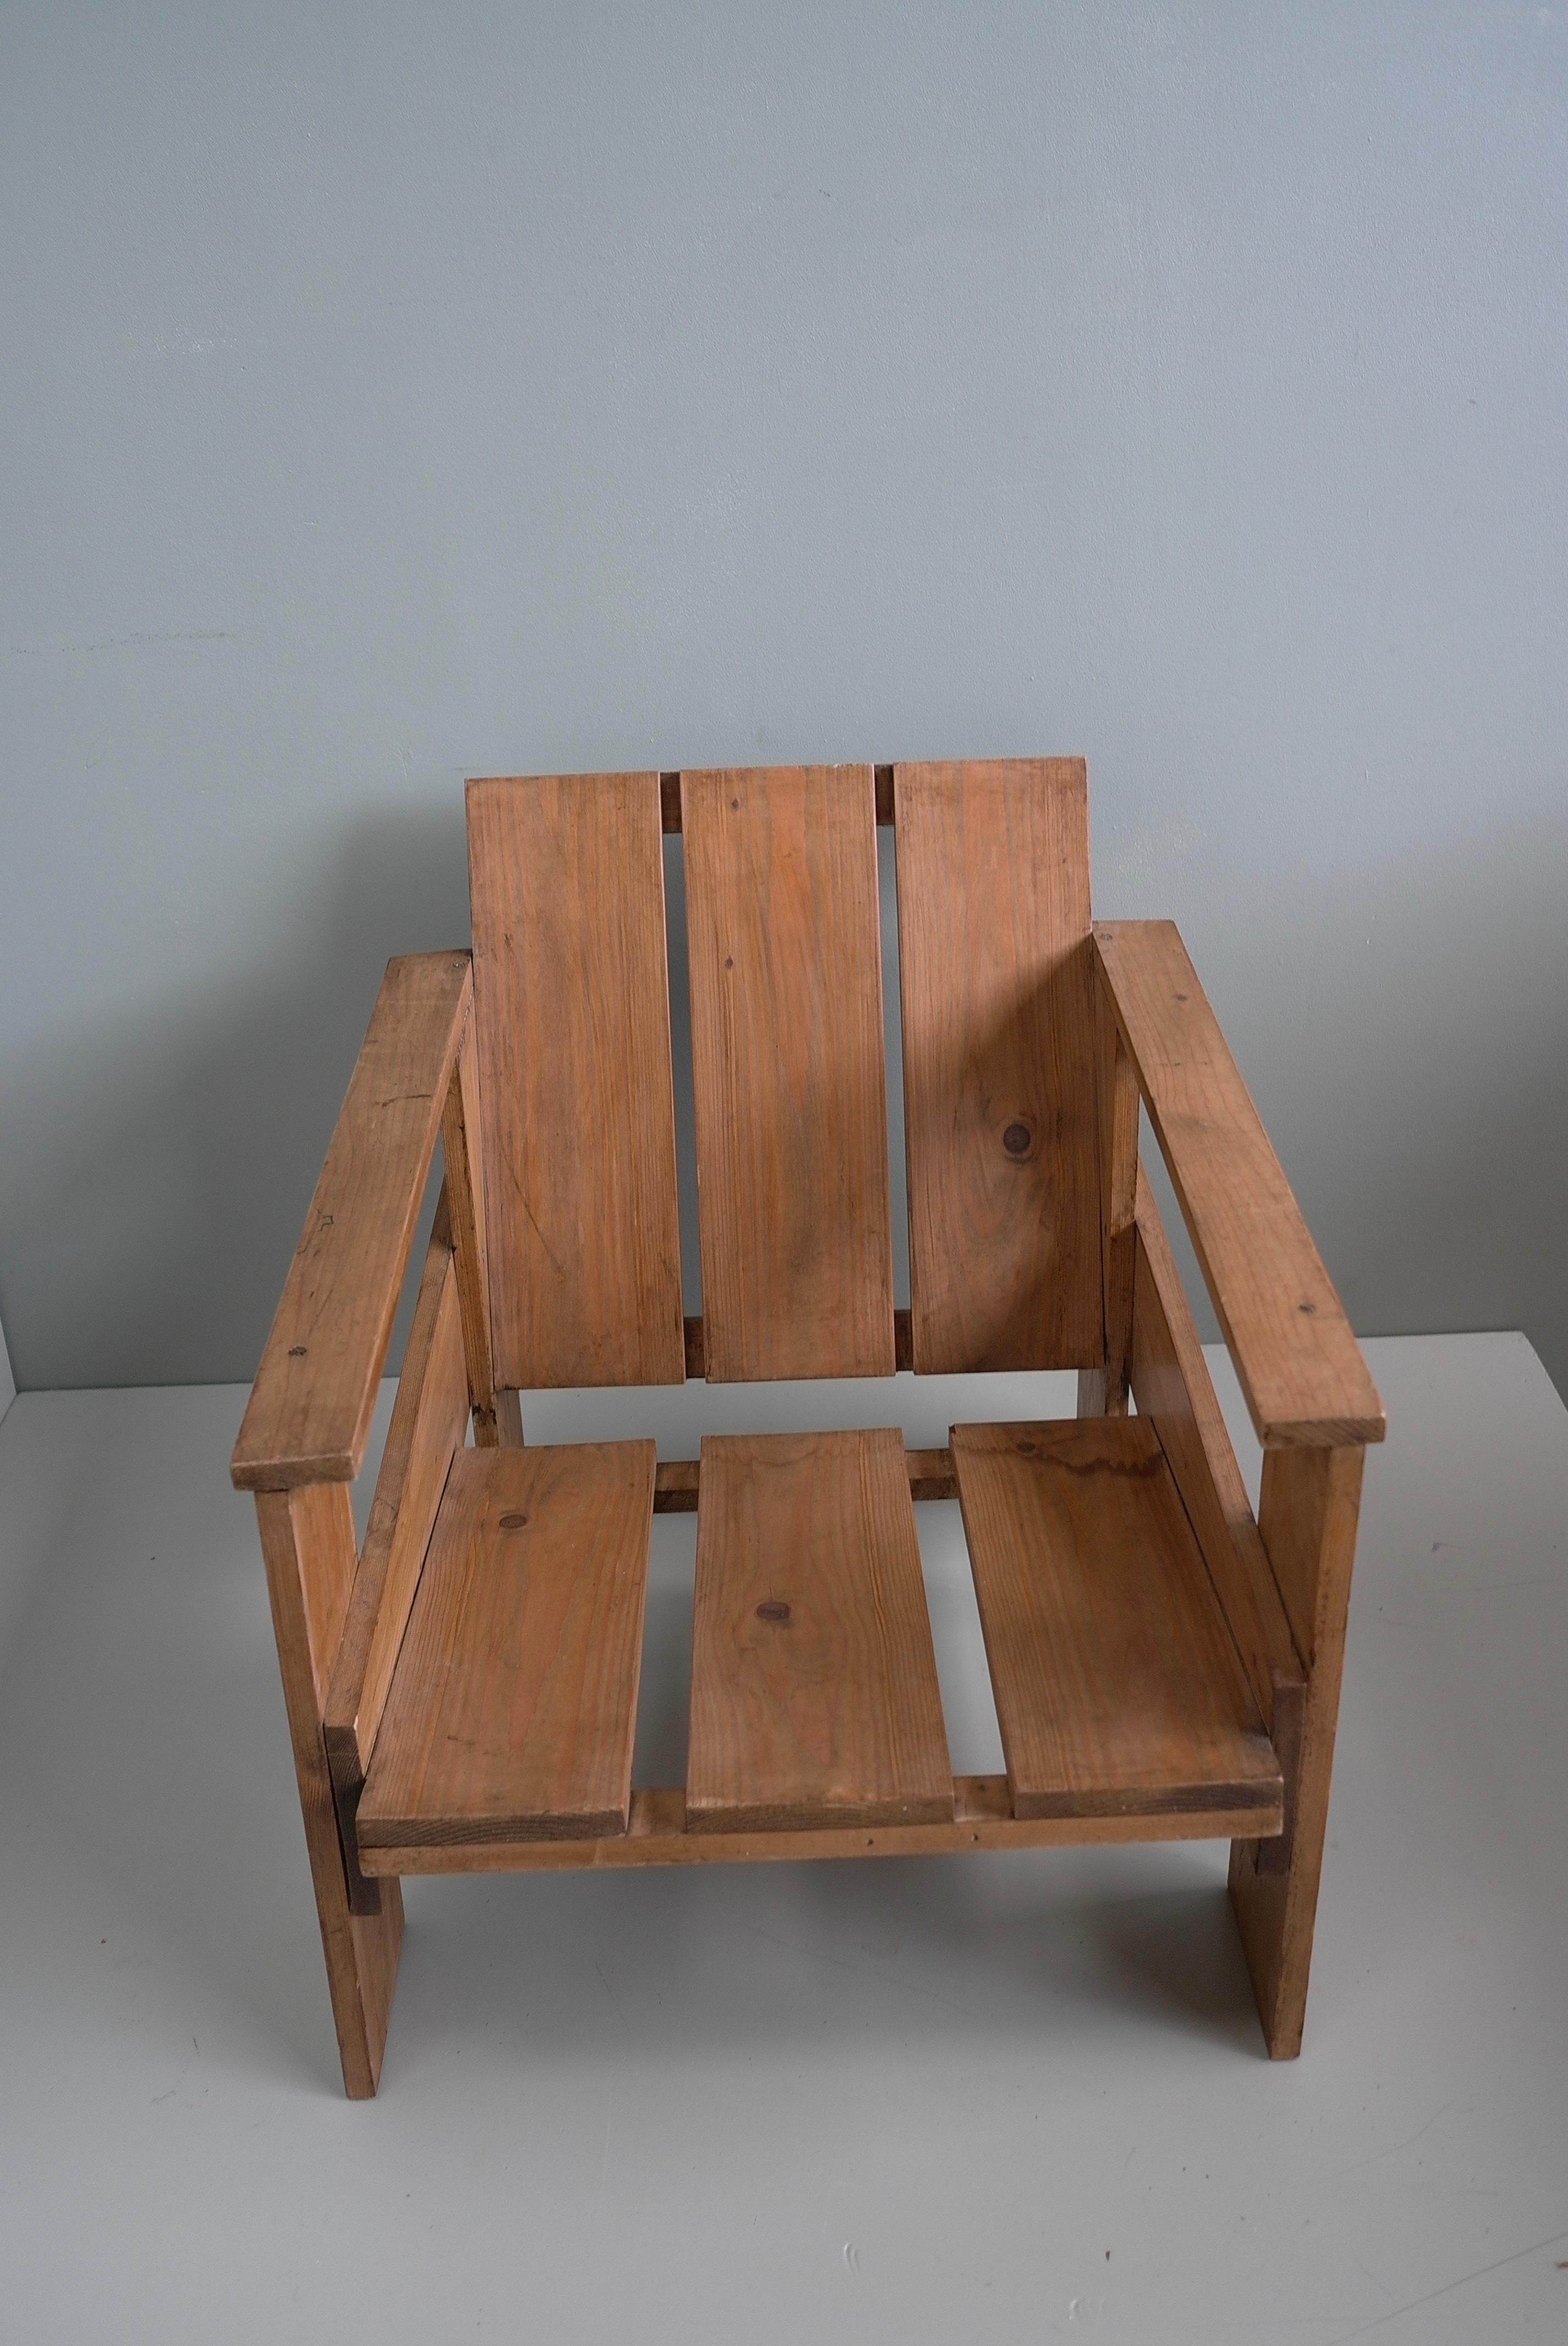 Crate Chair in style of Gerrit Rietveld, The Netherlands 1960's For Sale 9